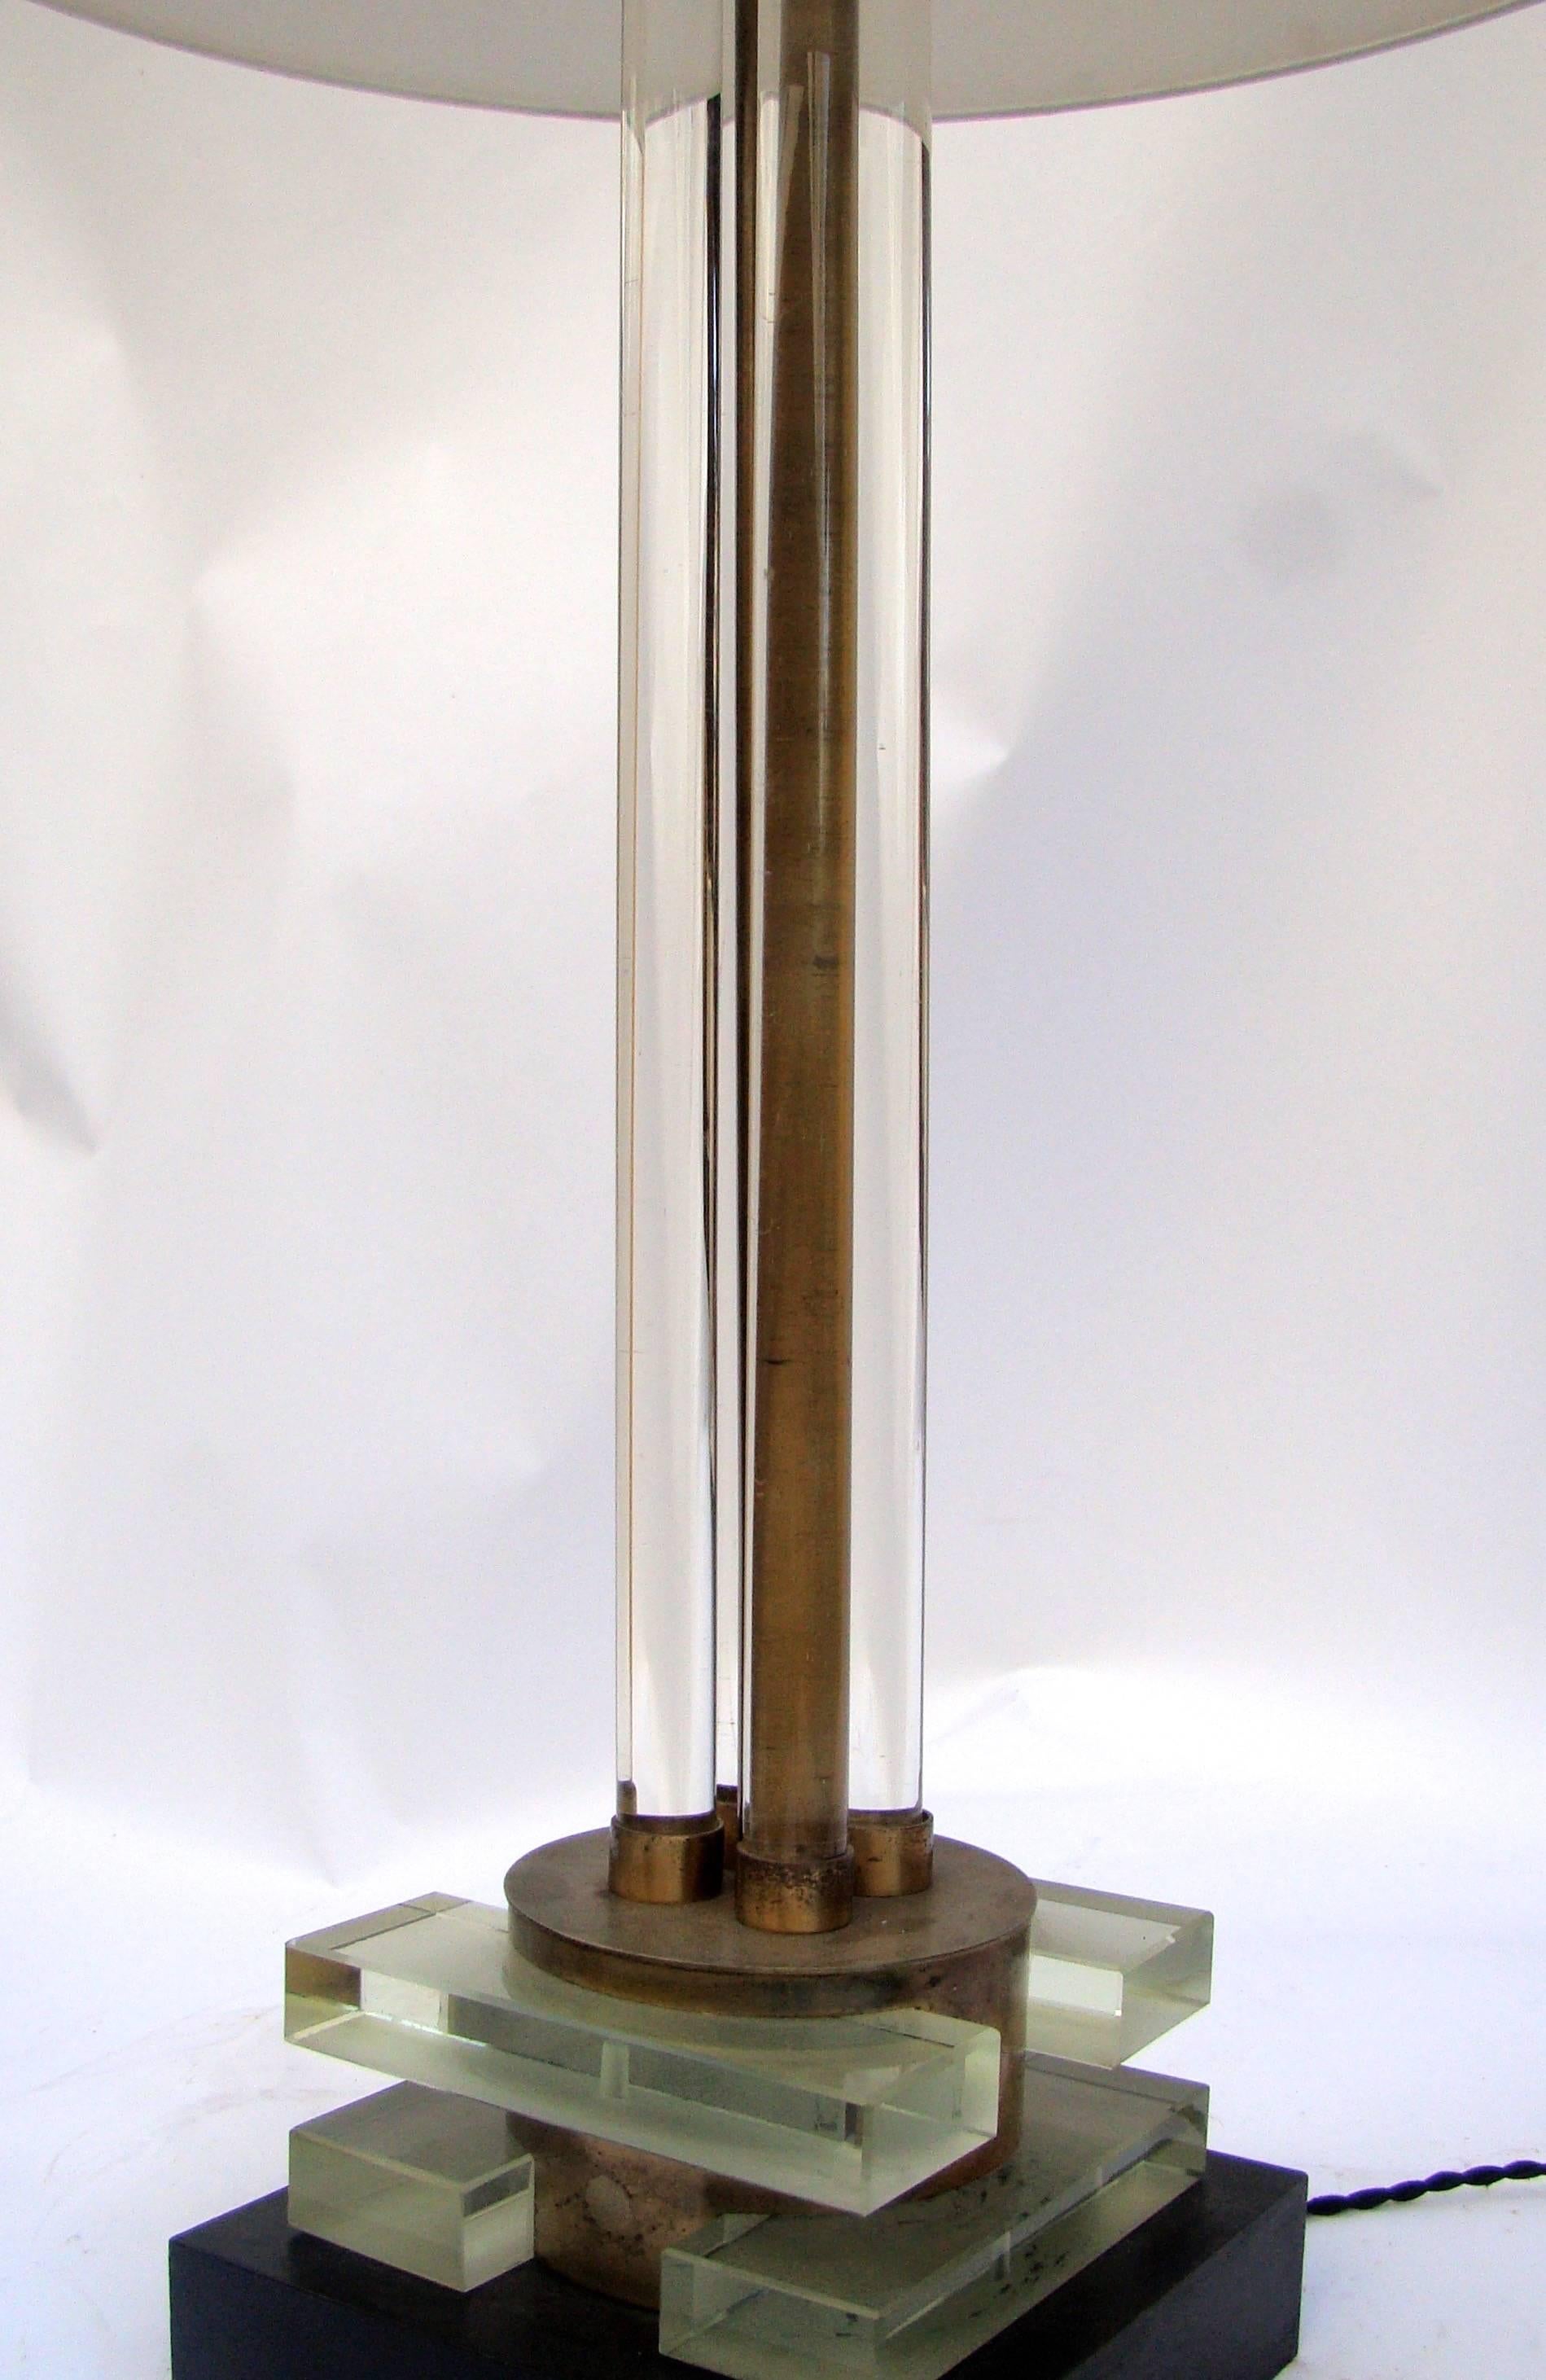 Original lamp in glass and bronze with an electric lighting system inside the base, circa 1930, France.